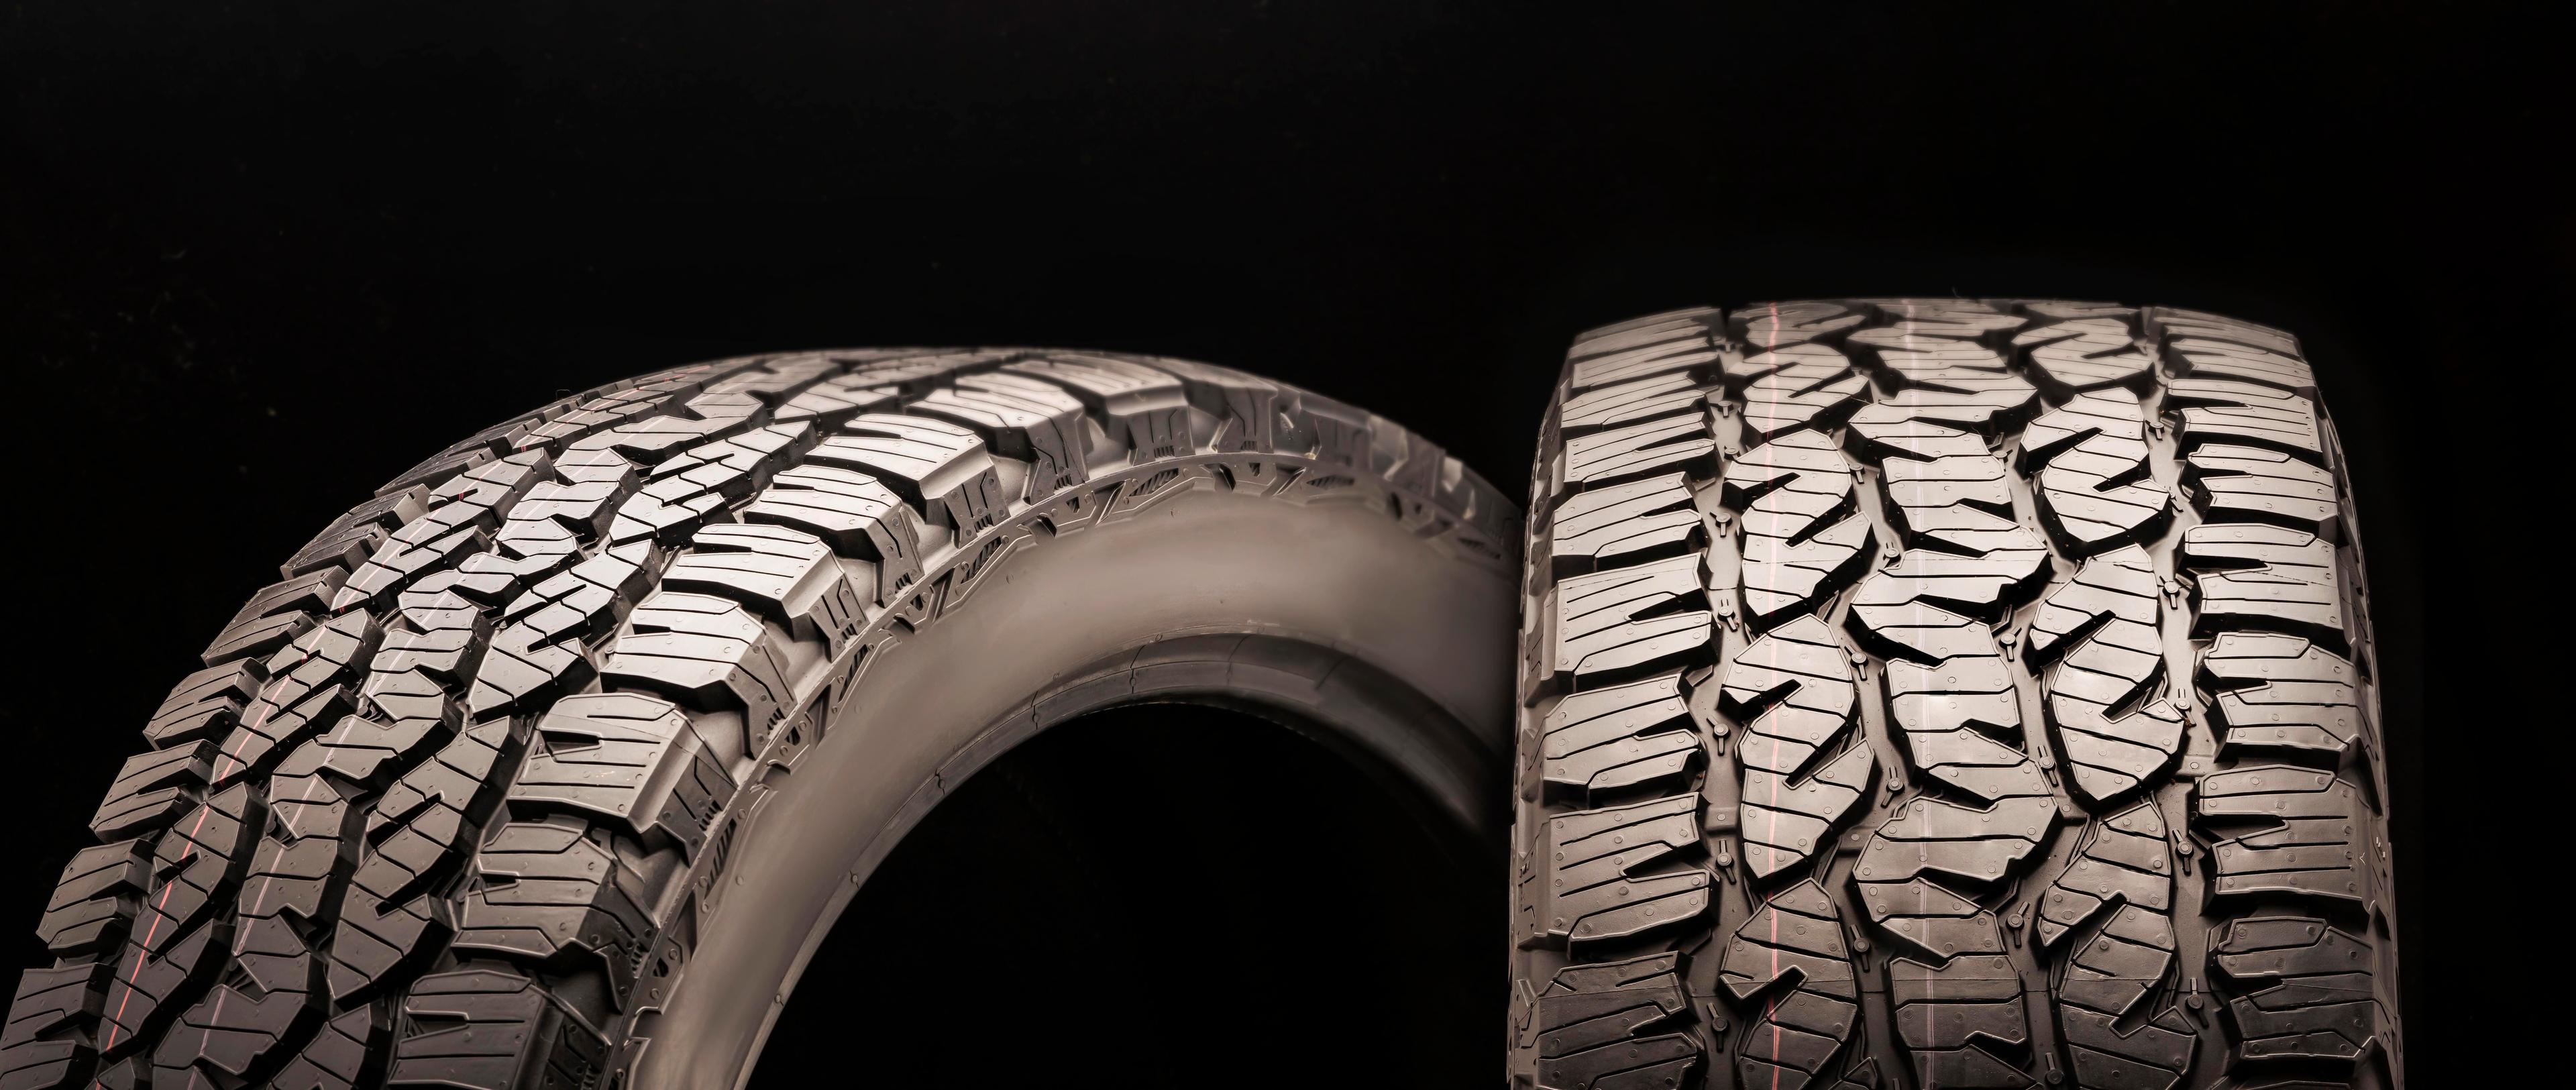 Tire aspect ratio showing tread and sidewall